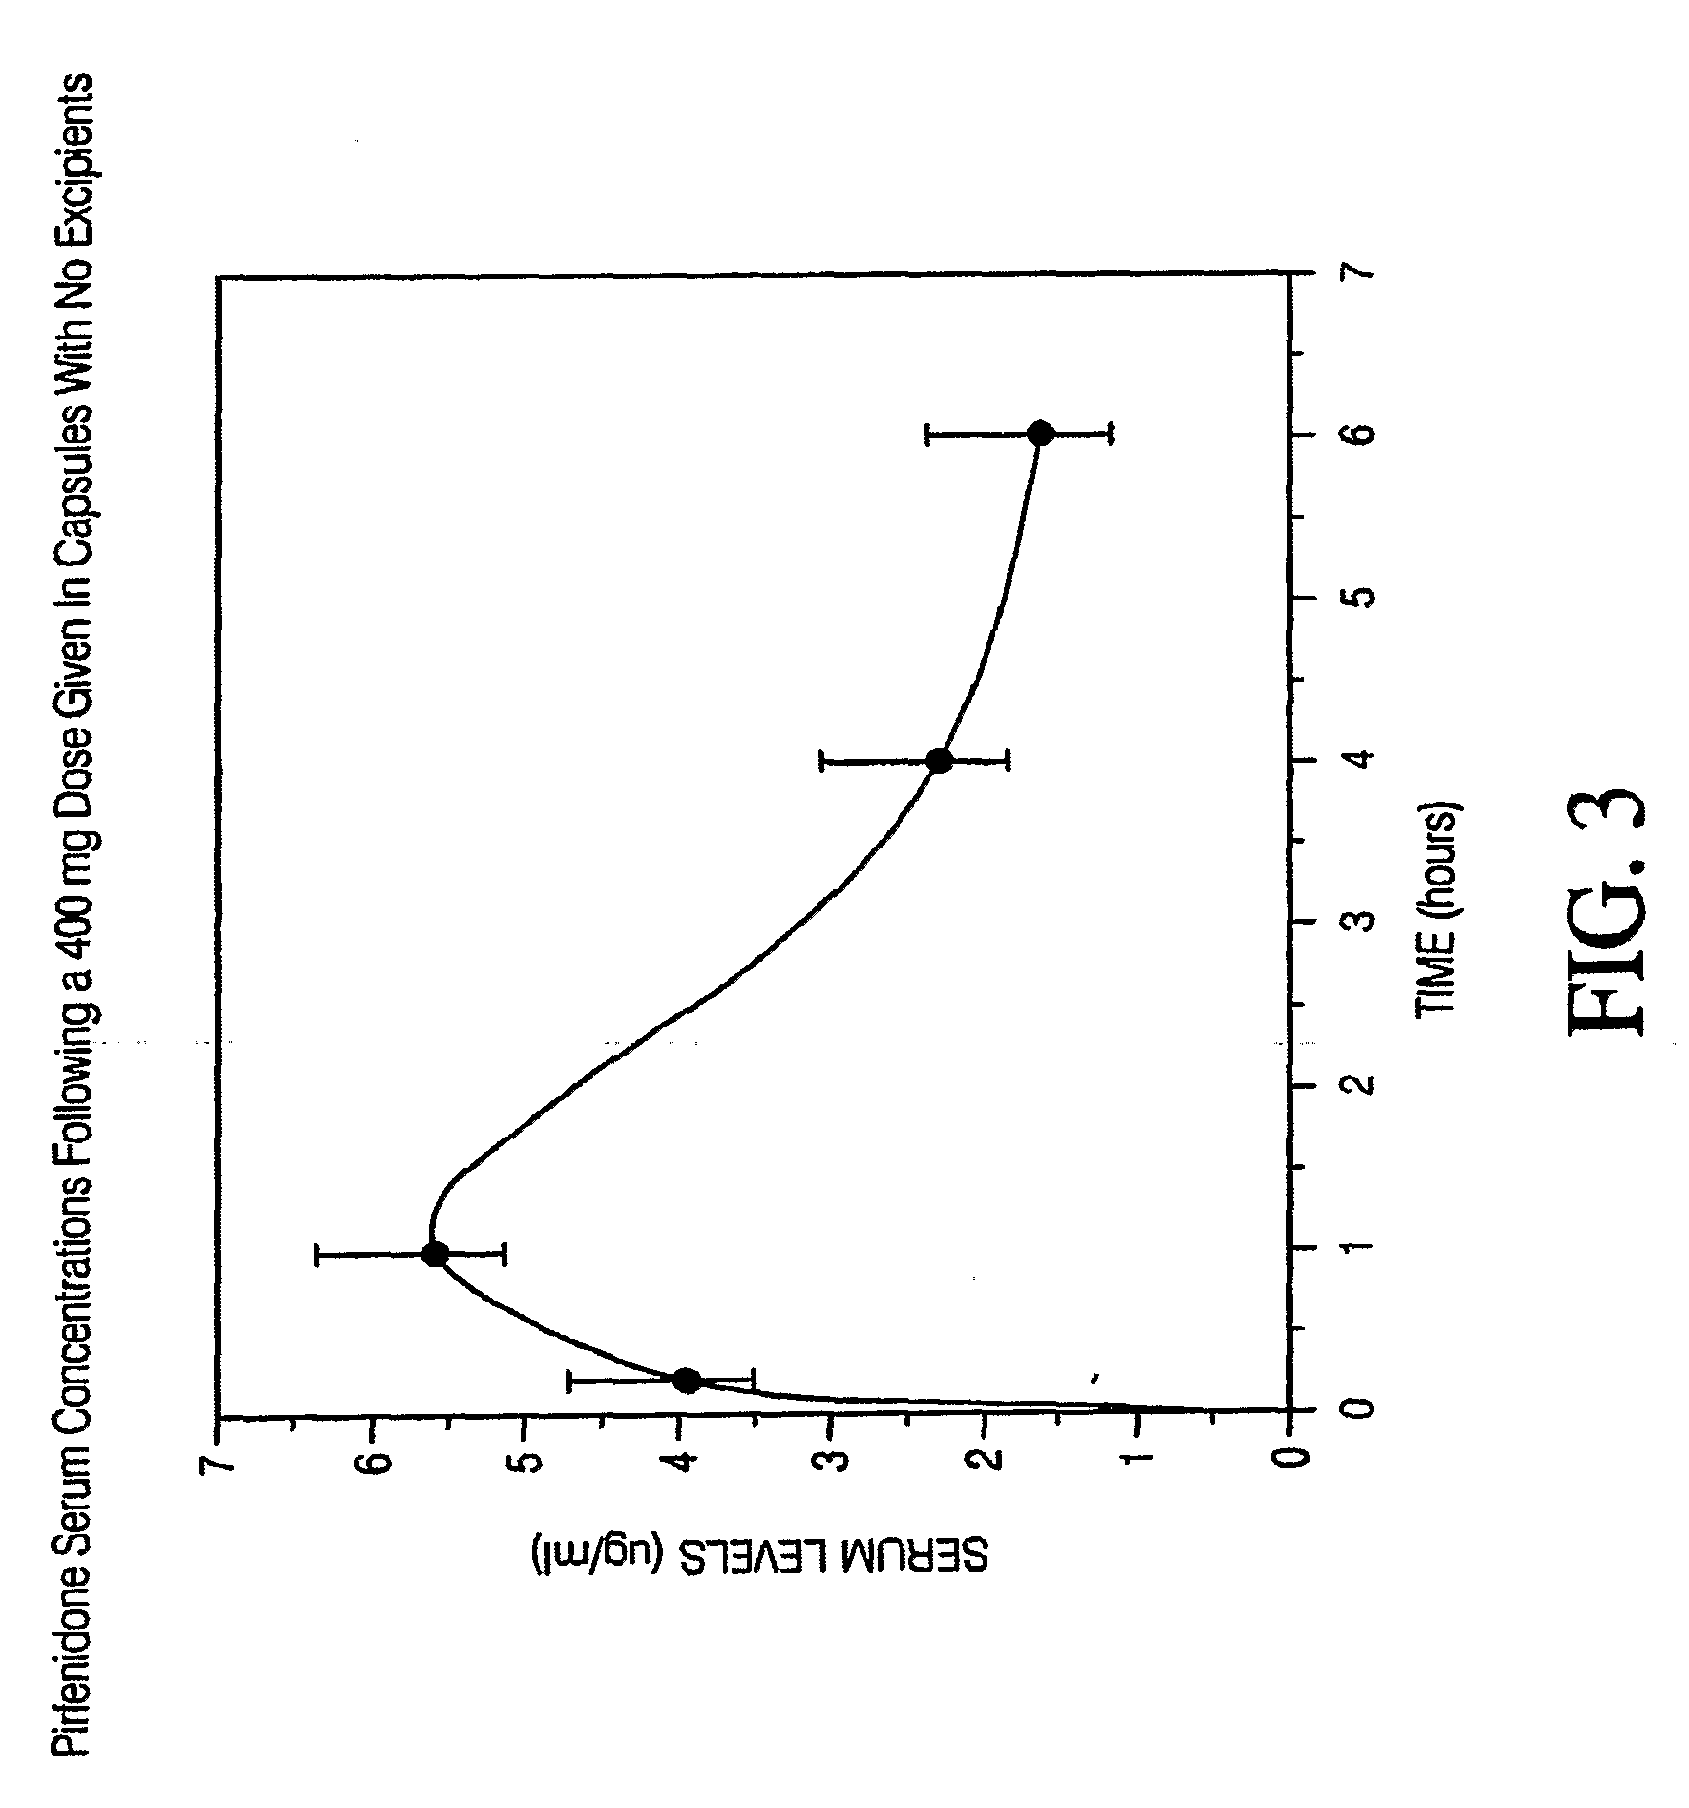 Capsule Formulation of Pirfenidone and Pharmaceutically Acceptable Excipients